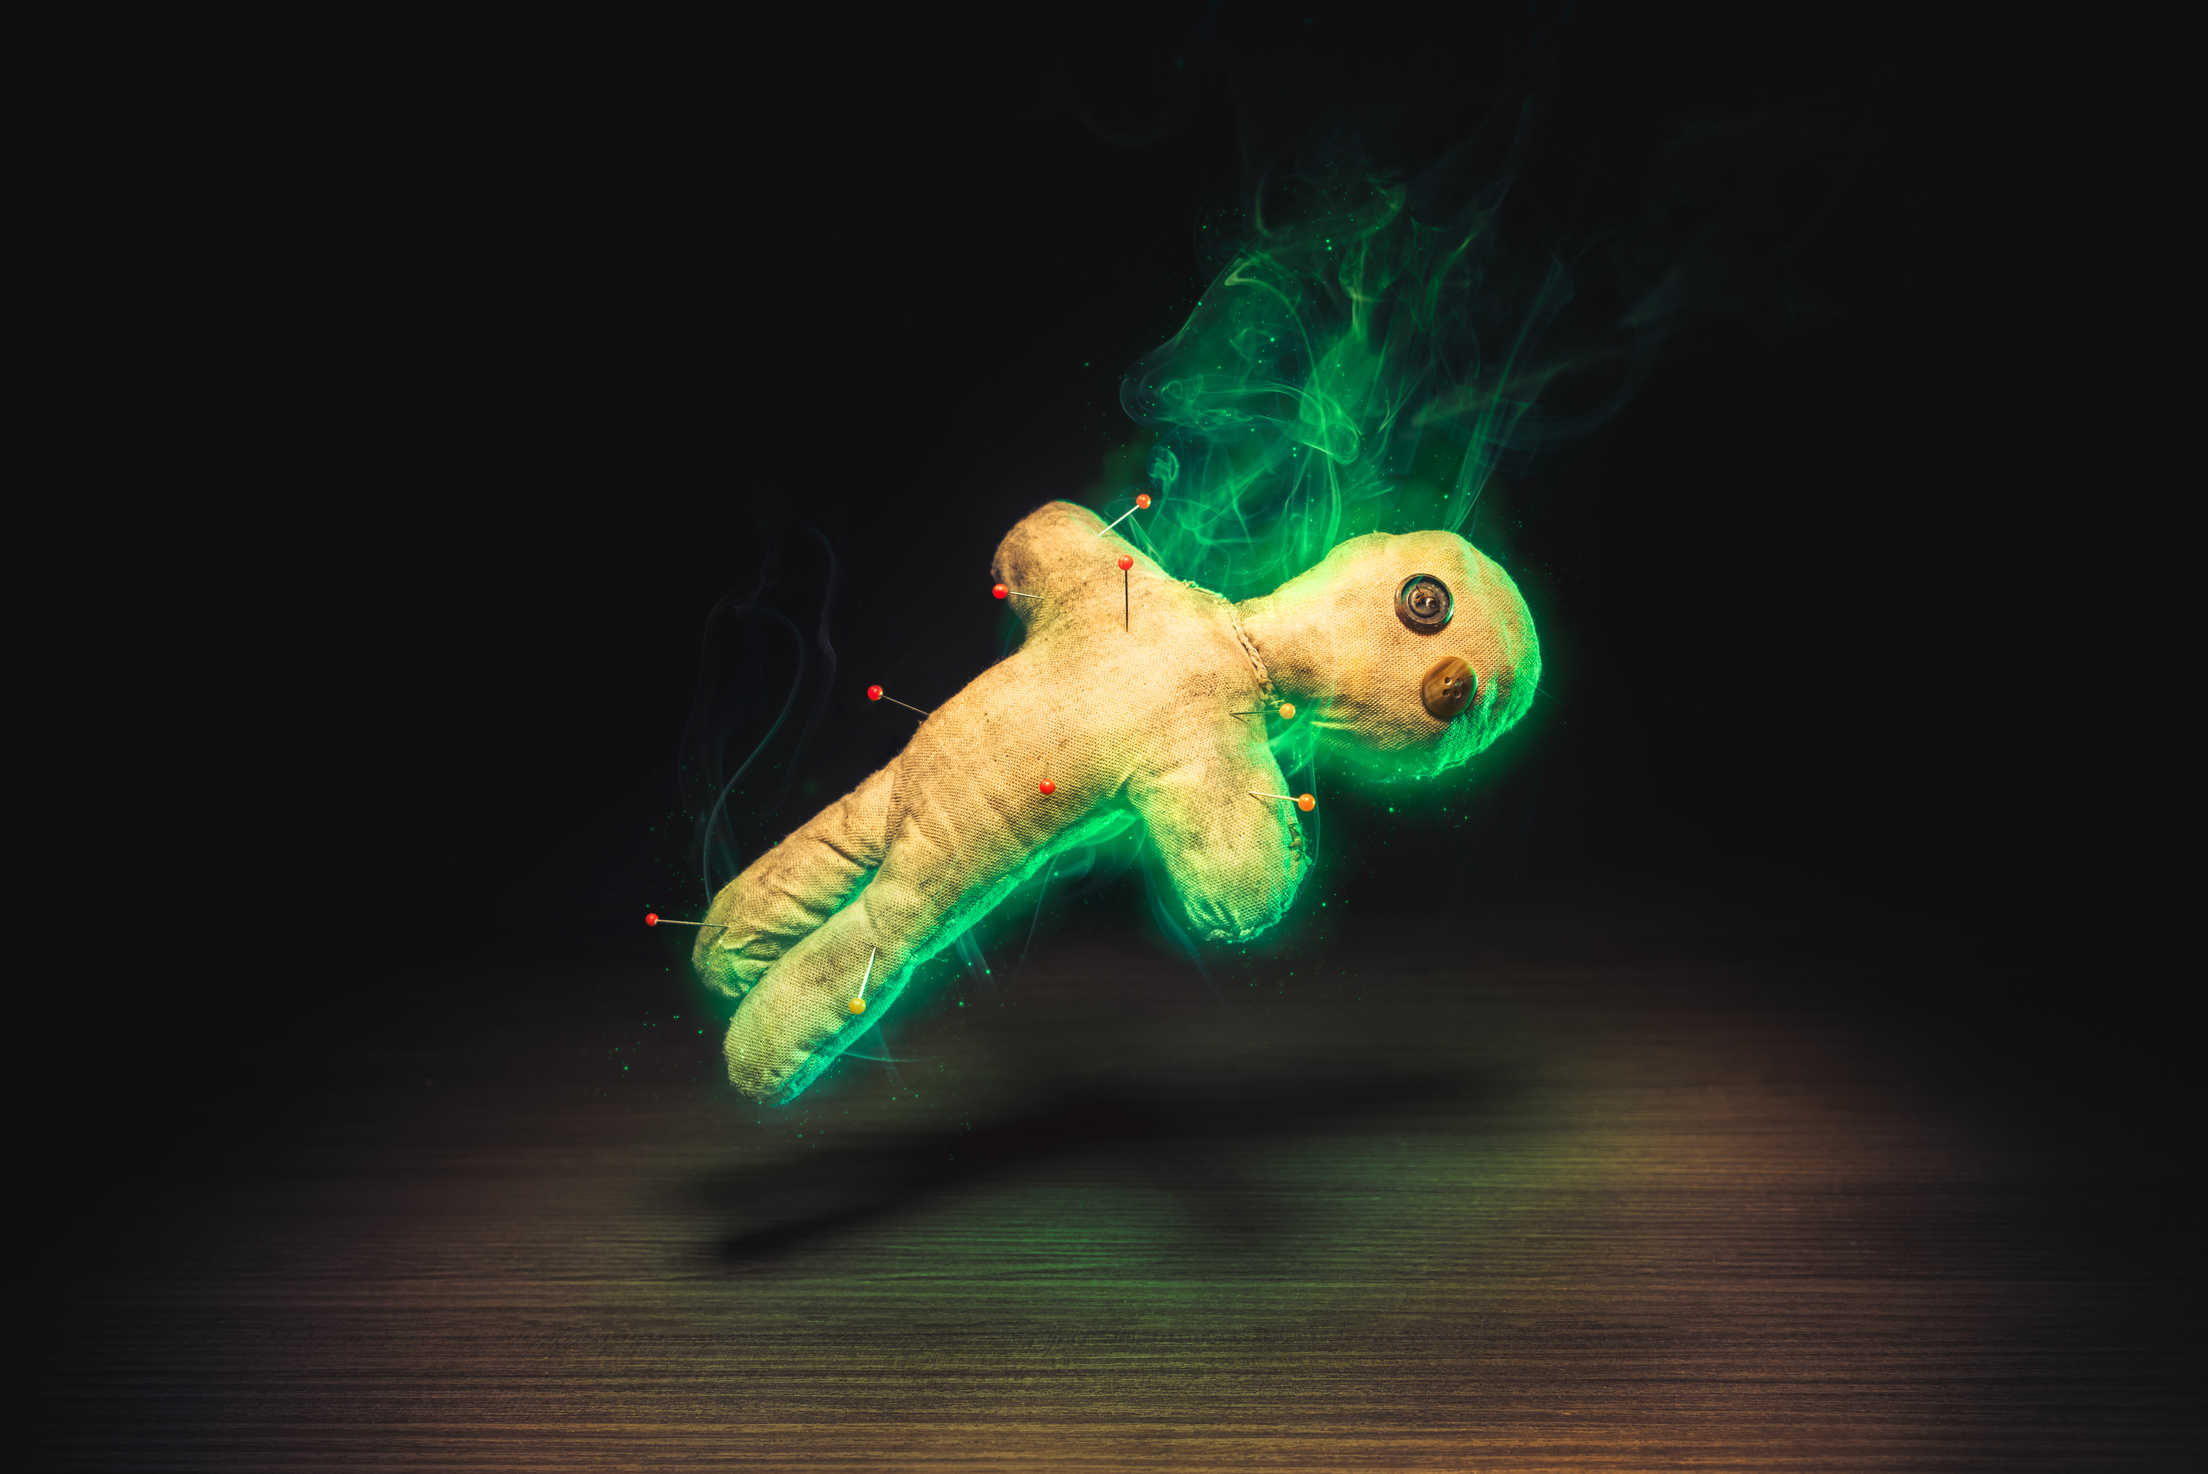 Voodoo doll on wooden background levitating in green